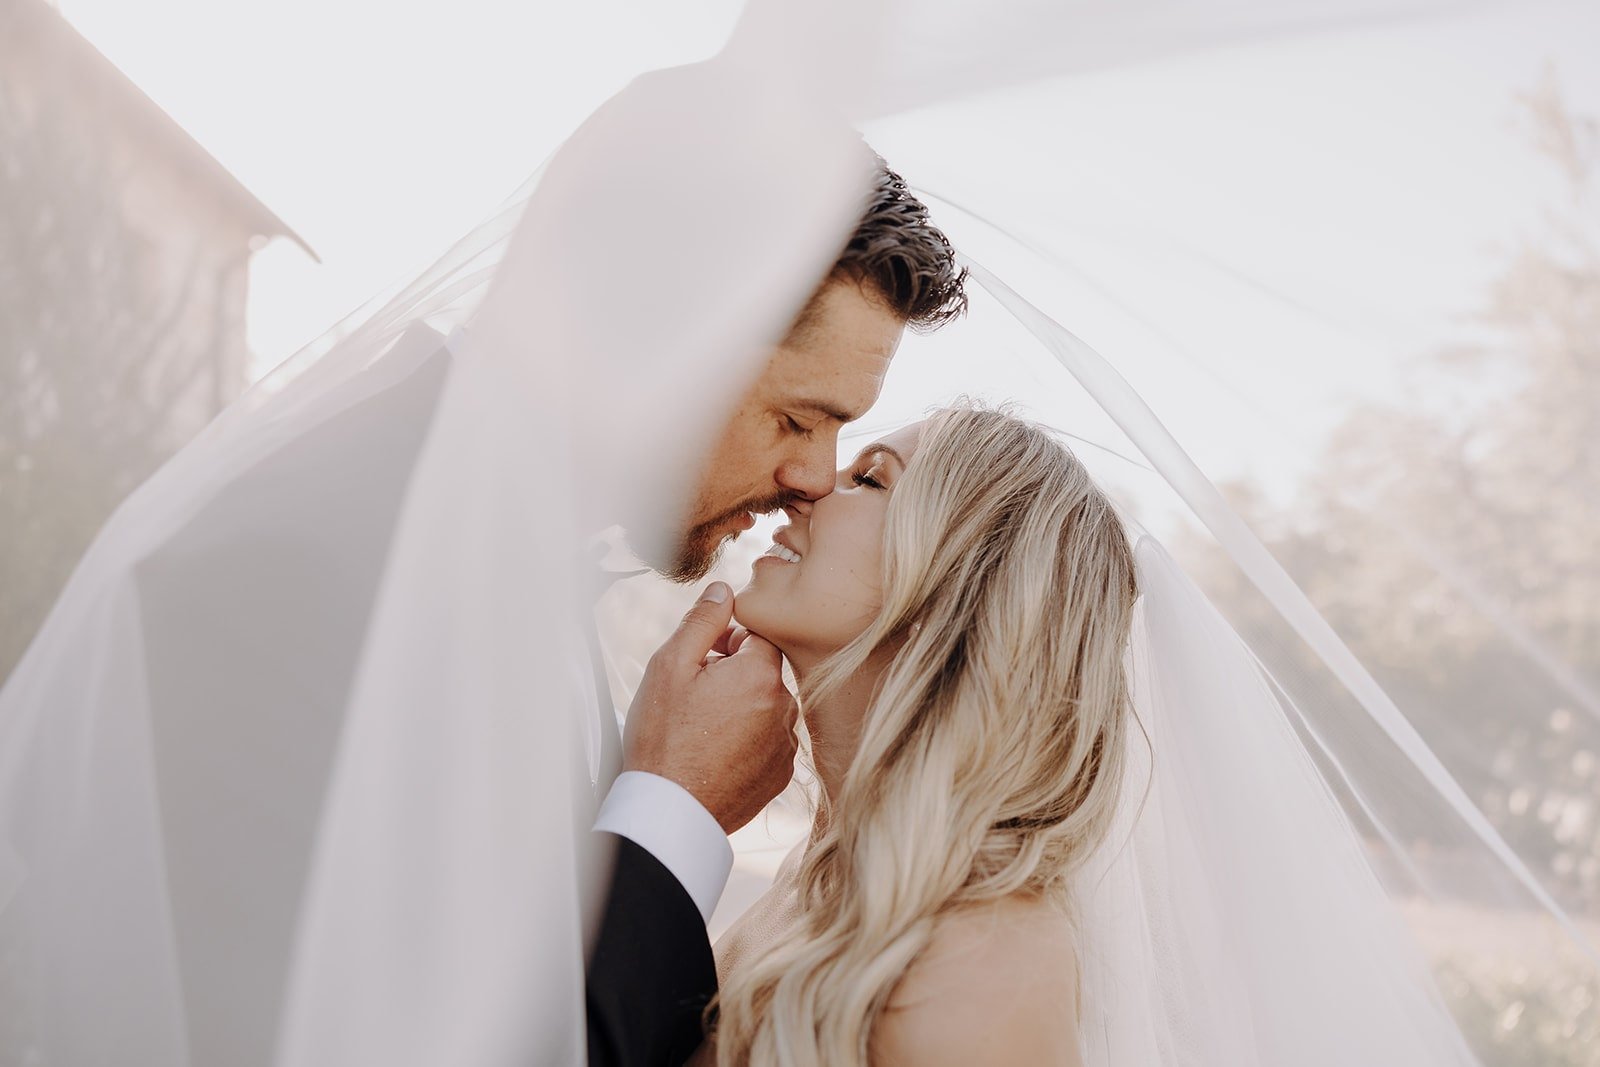 Bride and groom kiss under the veil during luxury wedding photos